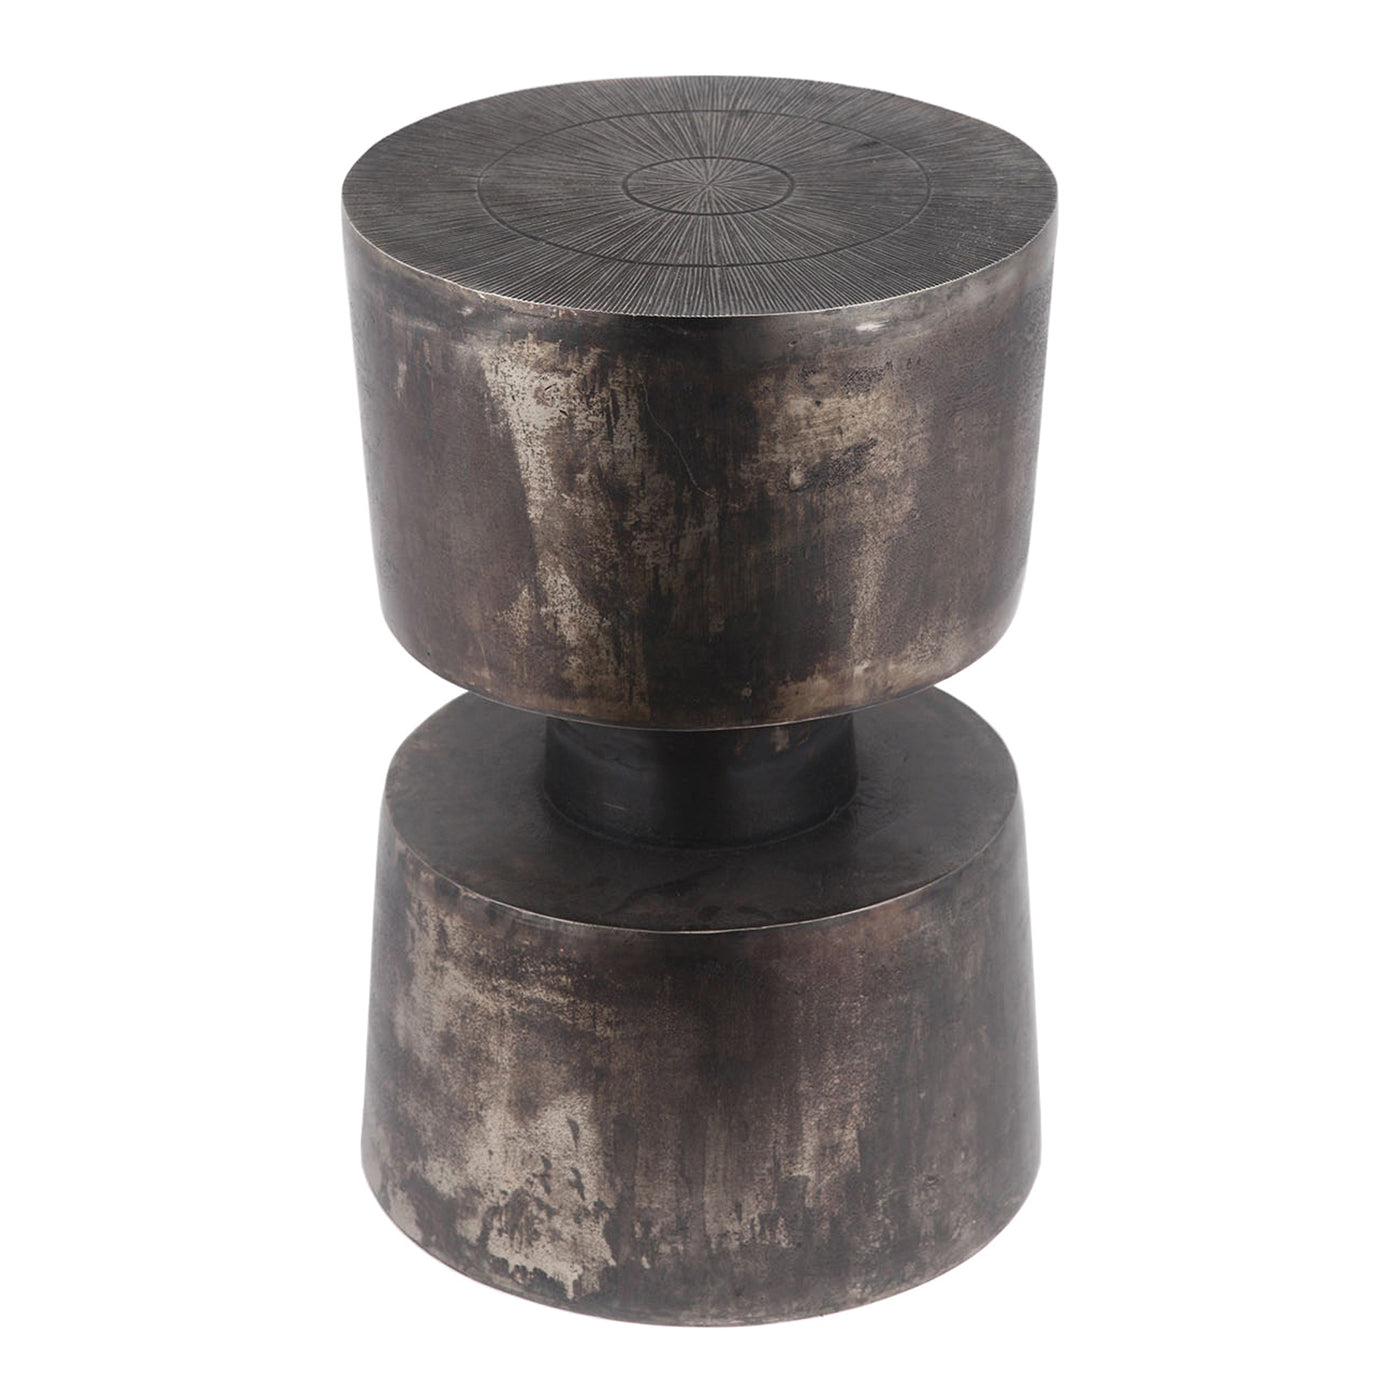 Sometimes the smaller things make the most significant impact. This accent table is cast in aluminum with a dark, antique ...